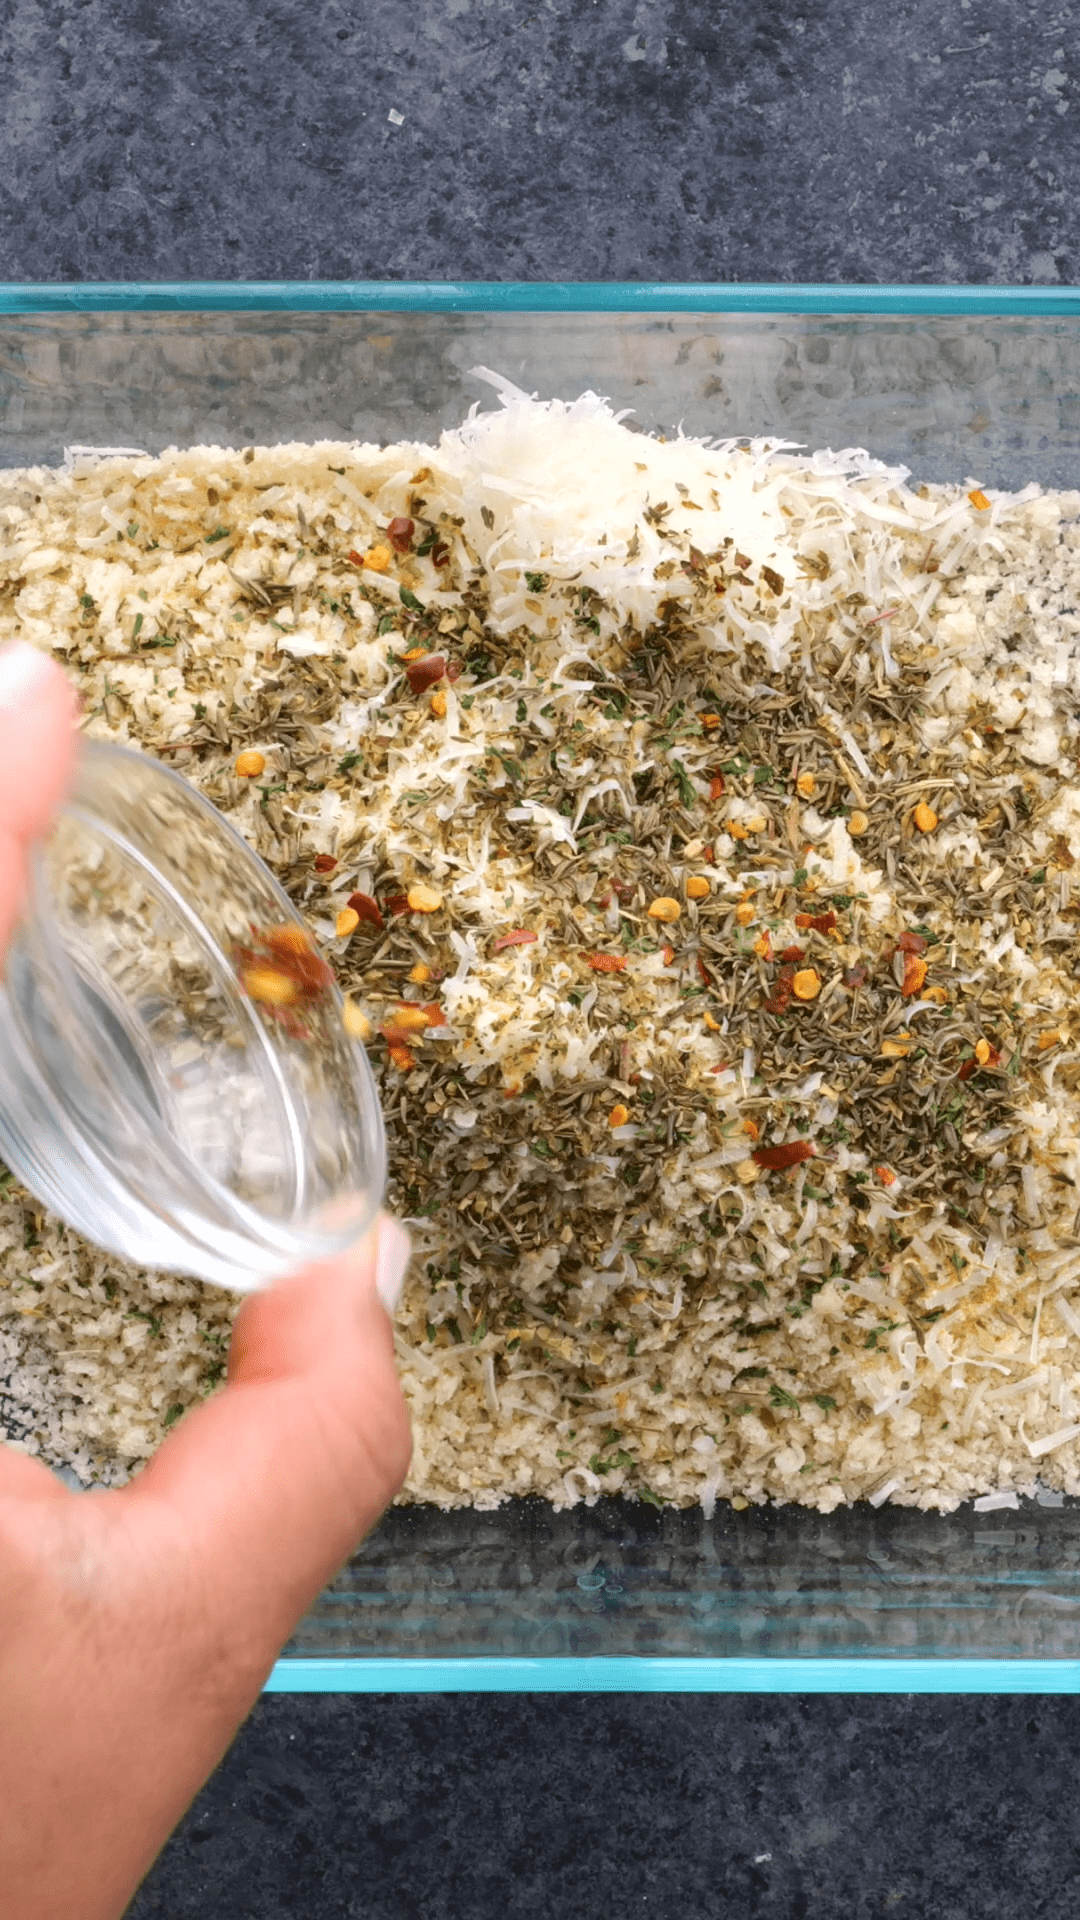 Mixing together a breadcrumb mixture in a clear dish